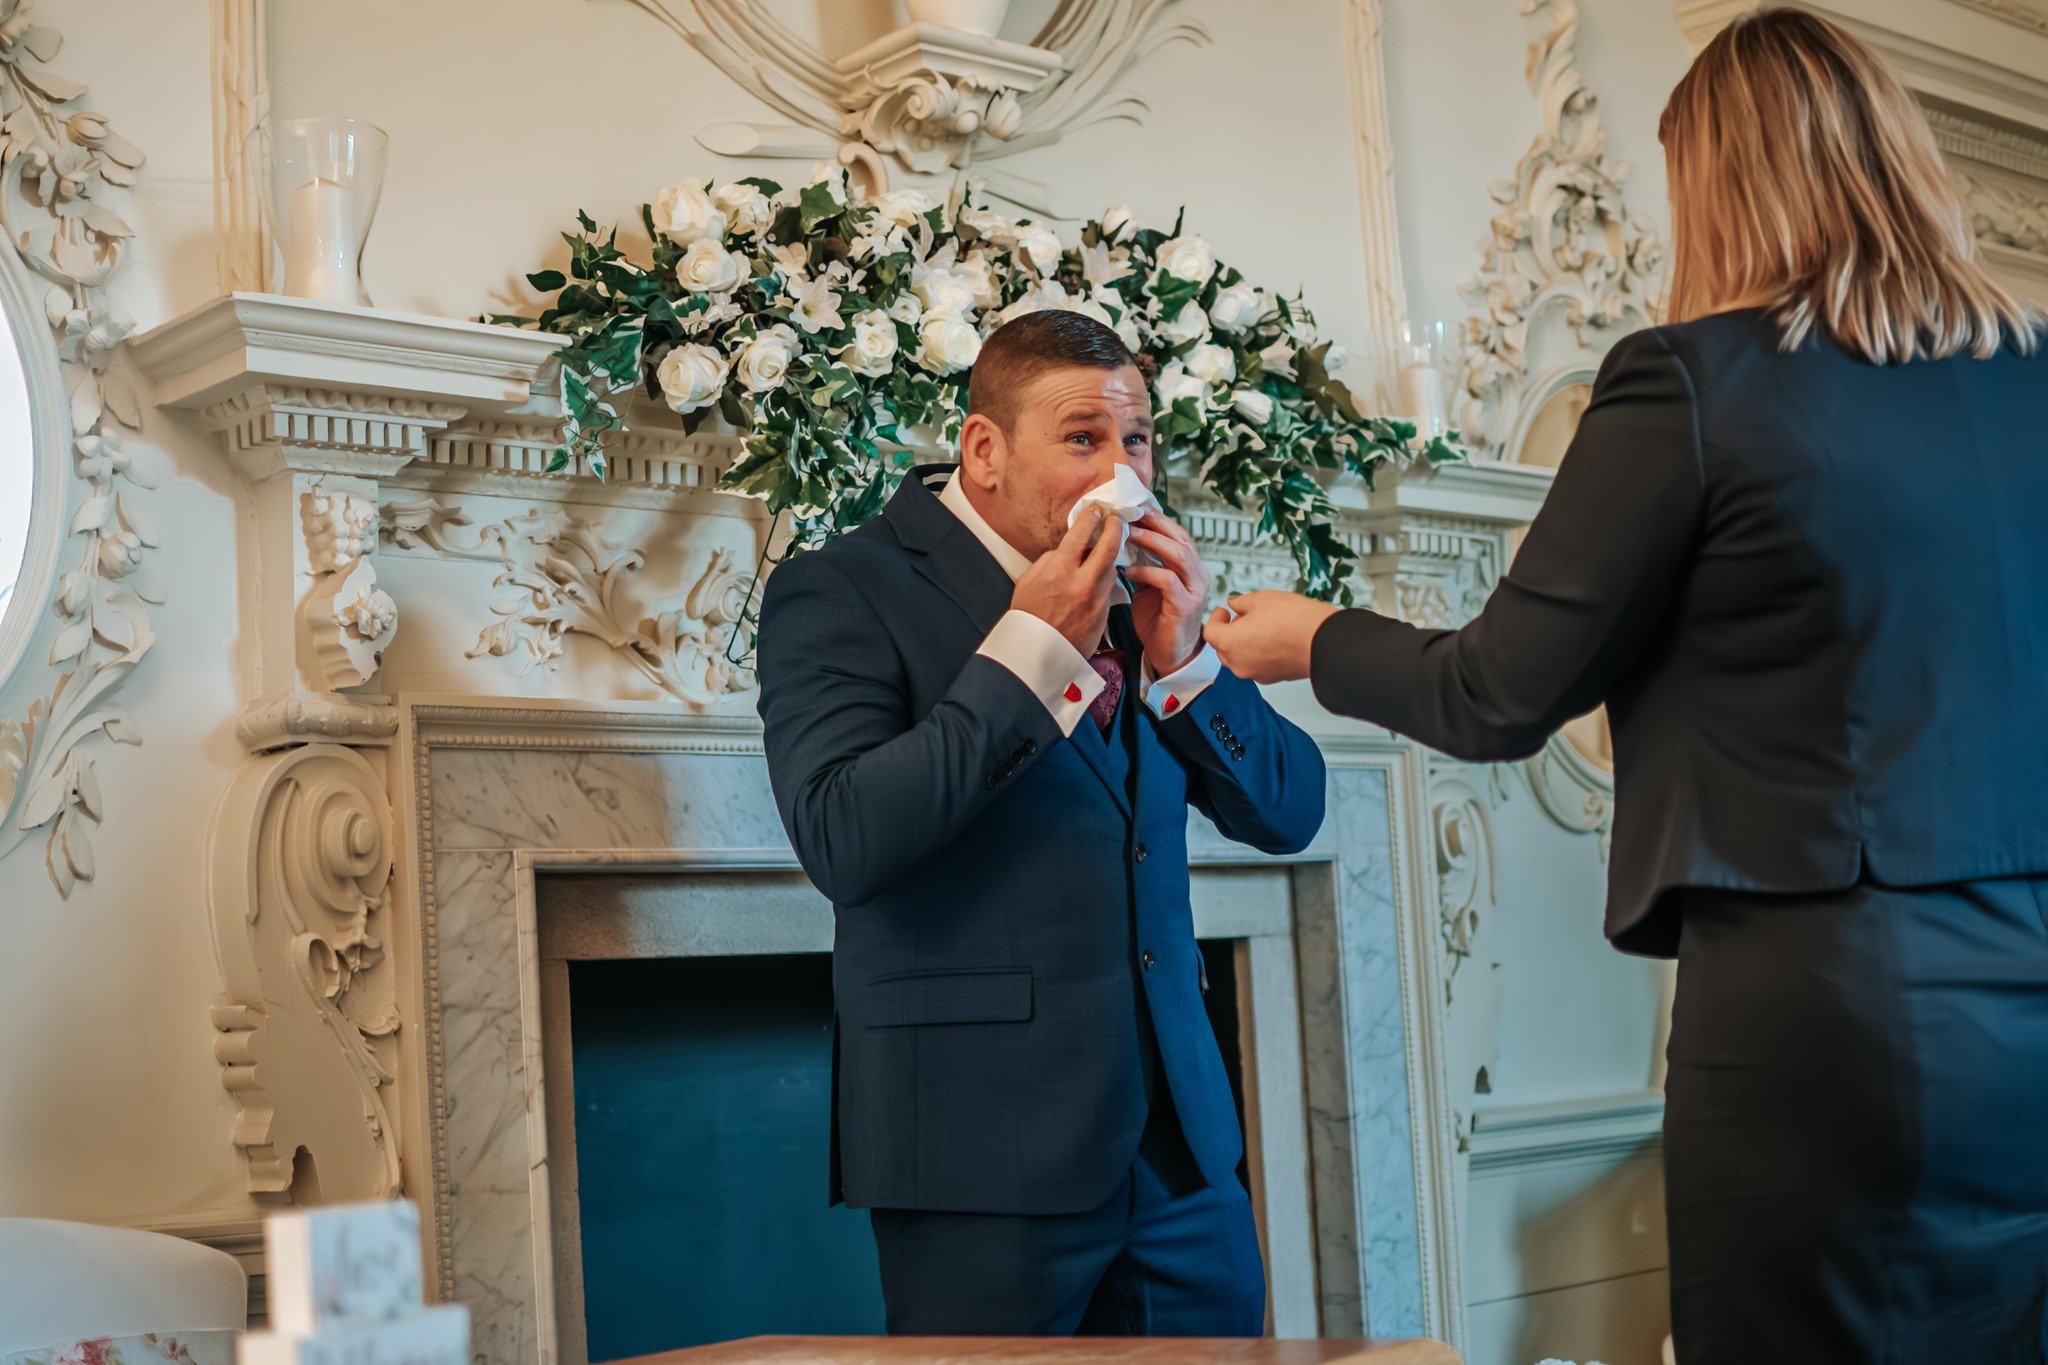 We're all about capturing those candid moments here at B&amp;C and here's a prime example.

This is Guy spitting out his chewing gum, ready for the Clare's arrival. He had to be prompted by the registrar, the poor man just wanted minty fresh breath o